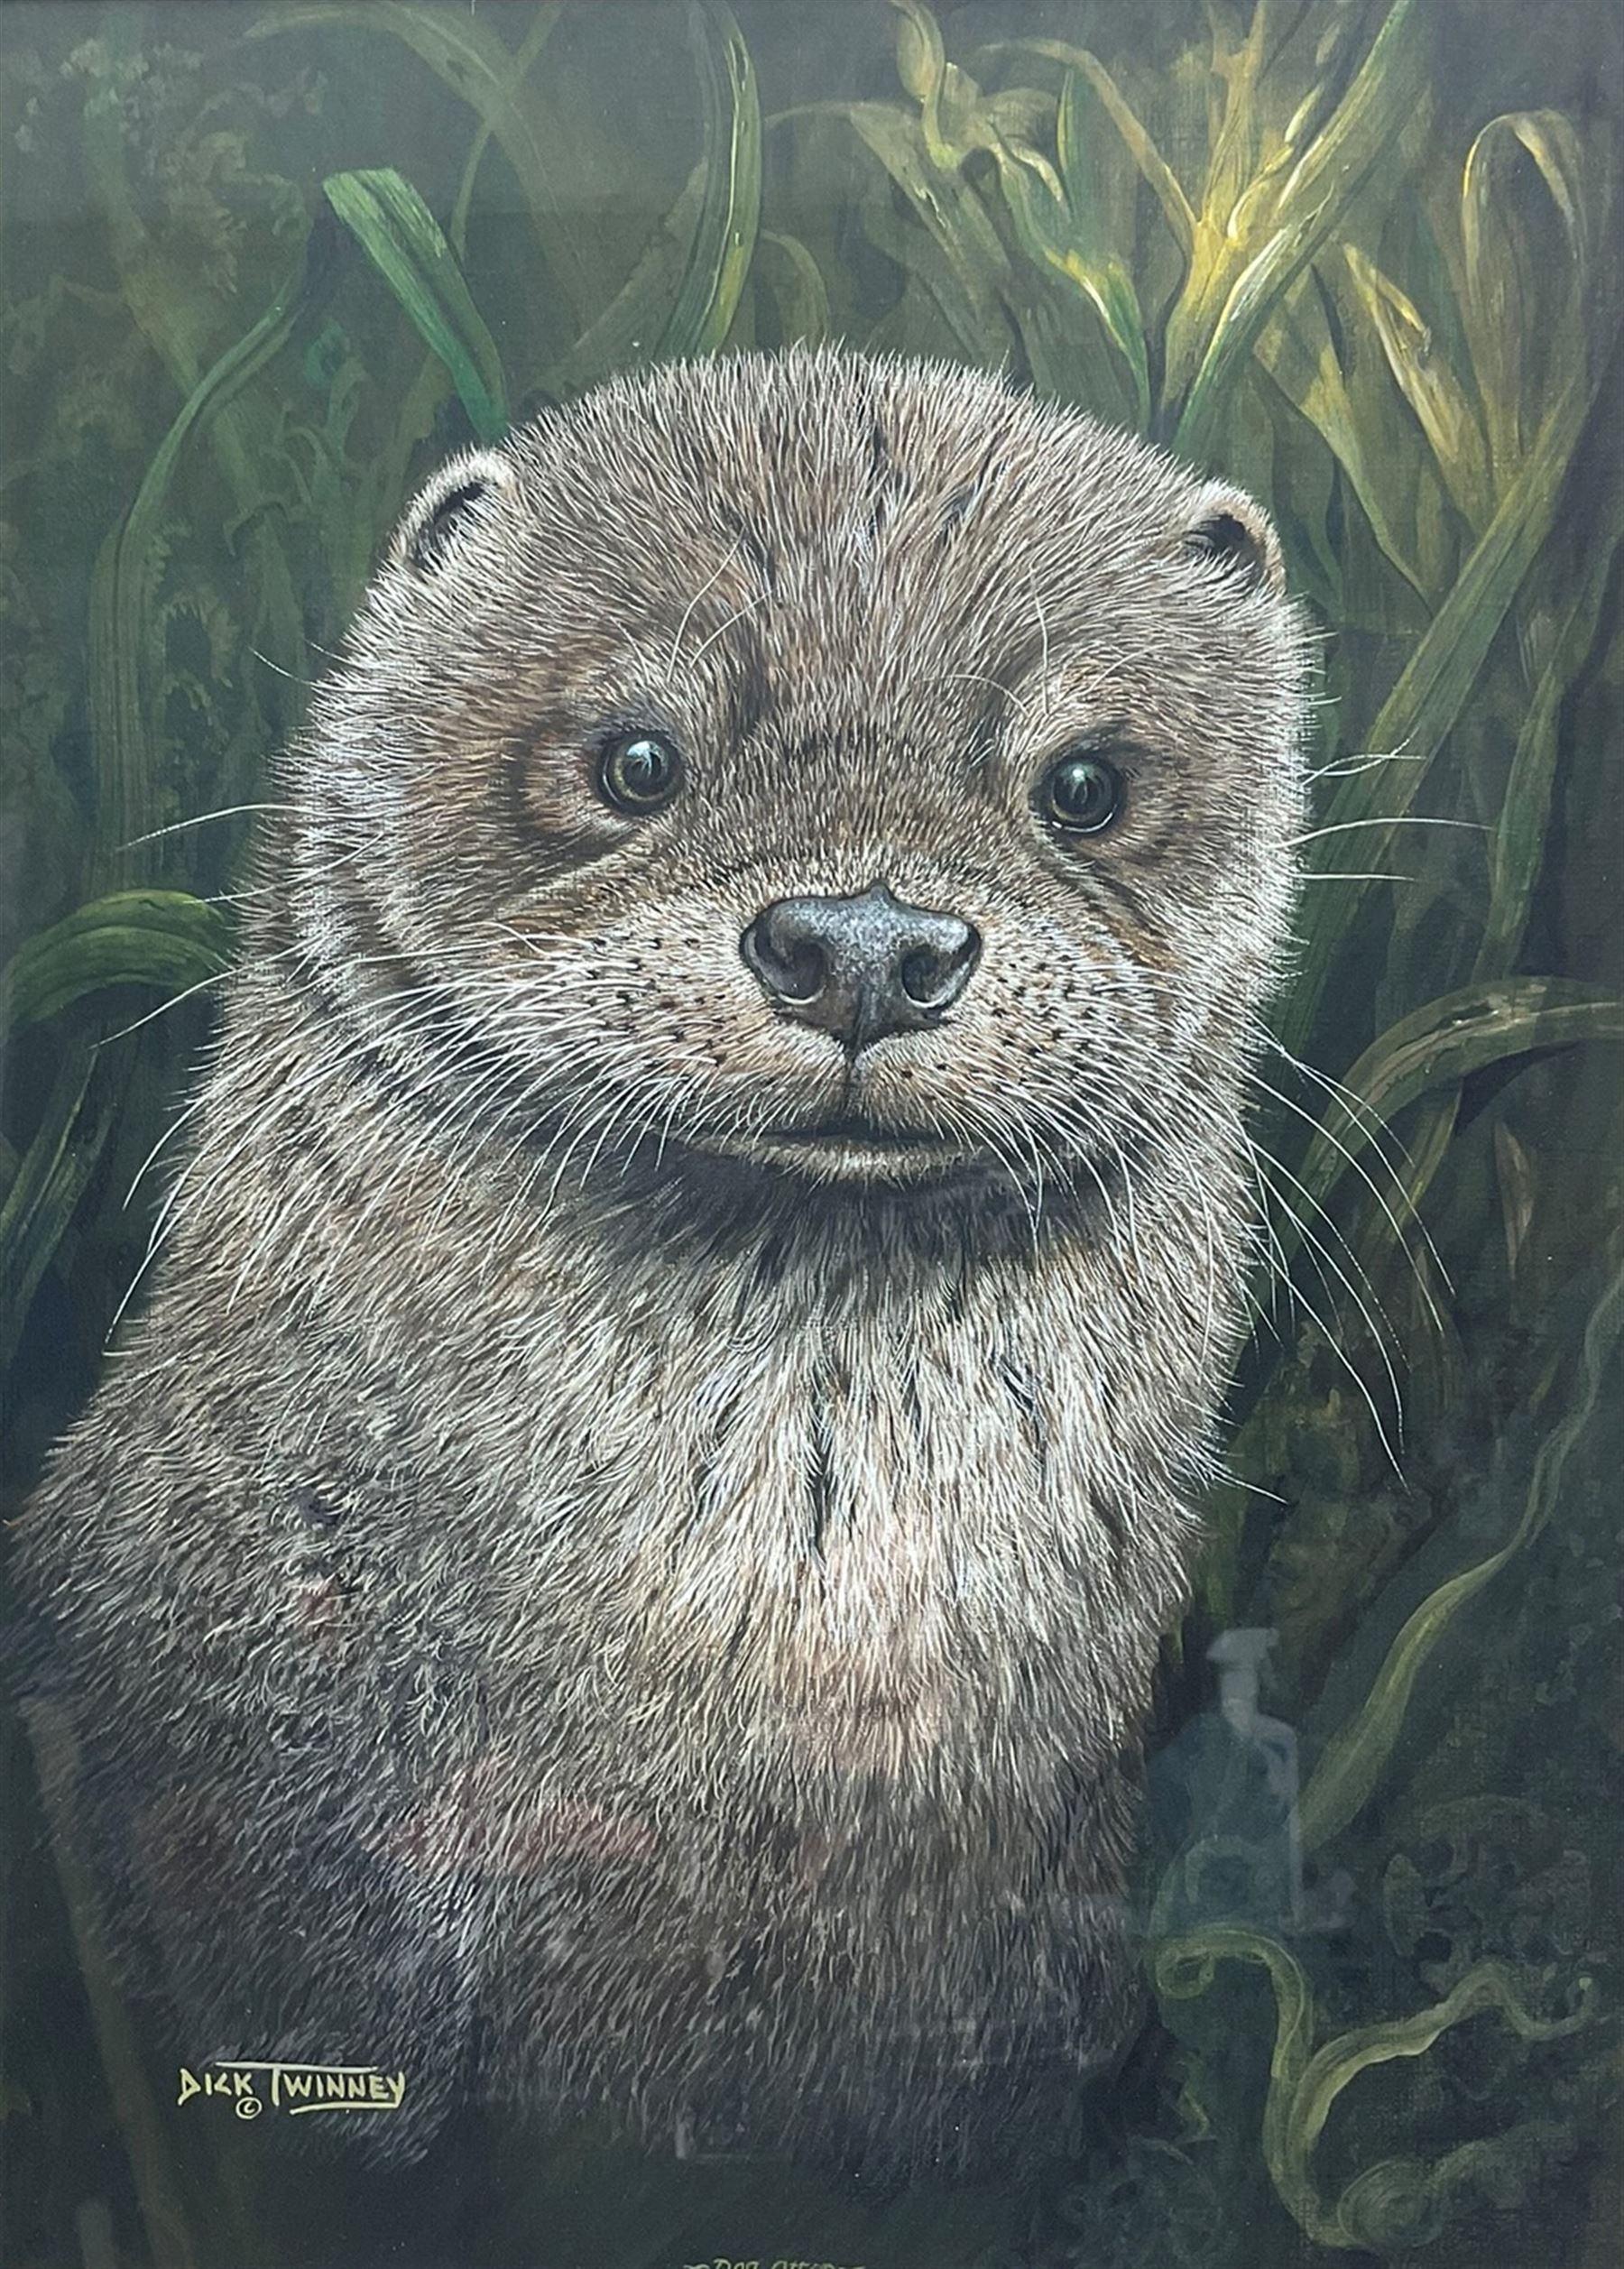 Dick Twinney (British 1943-): Otter Pup in Reeds